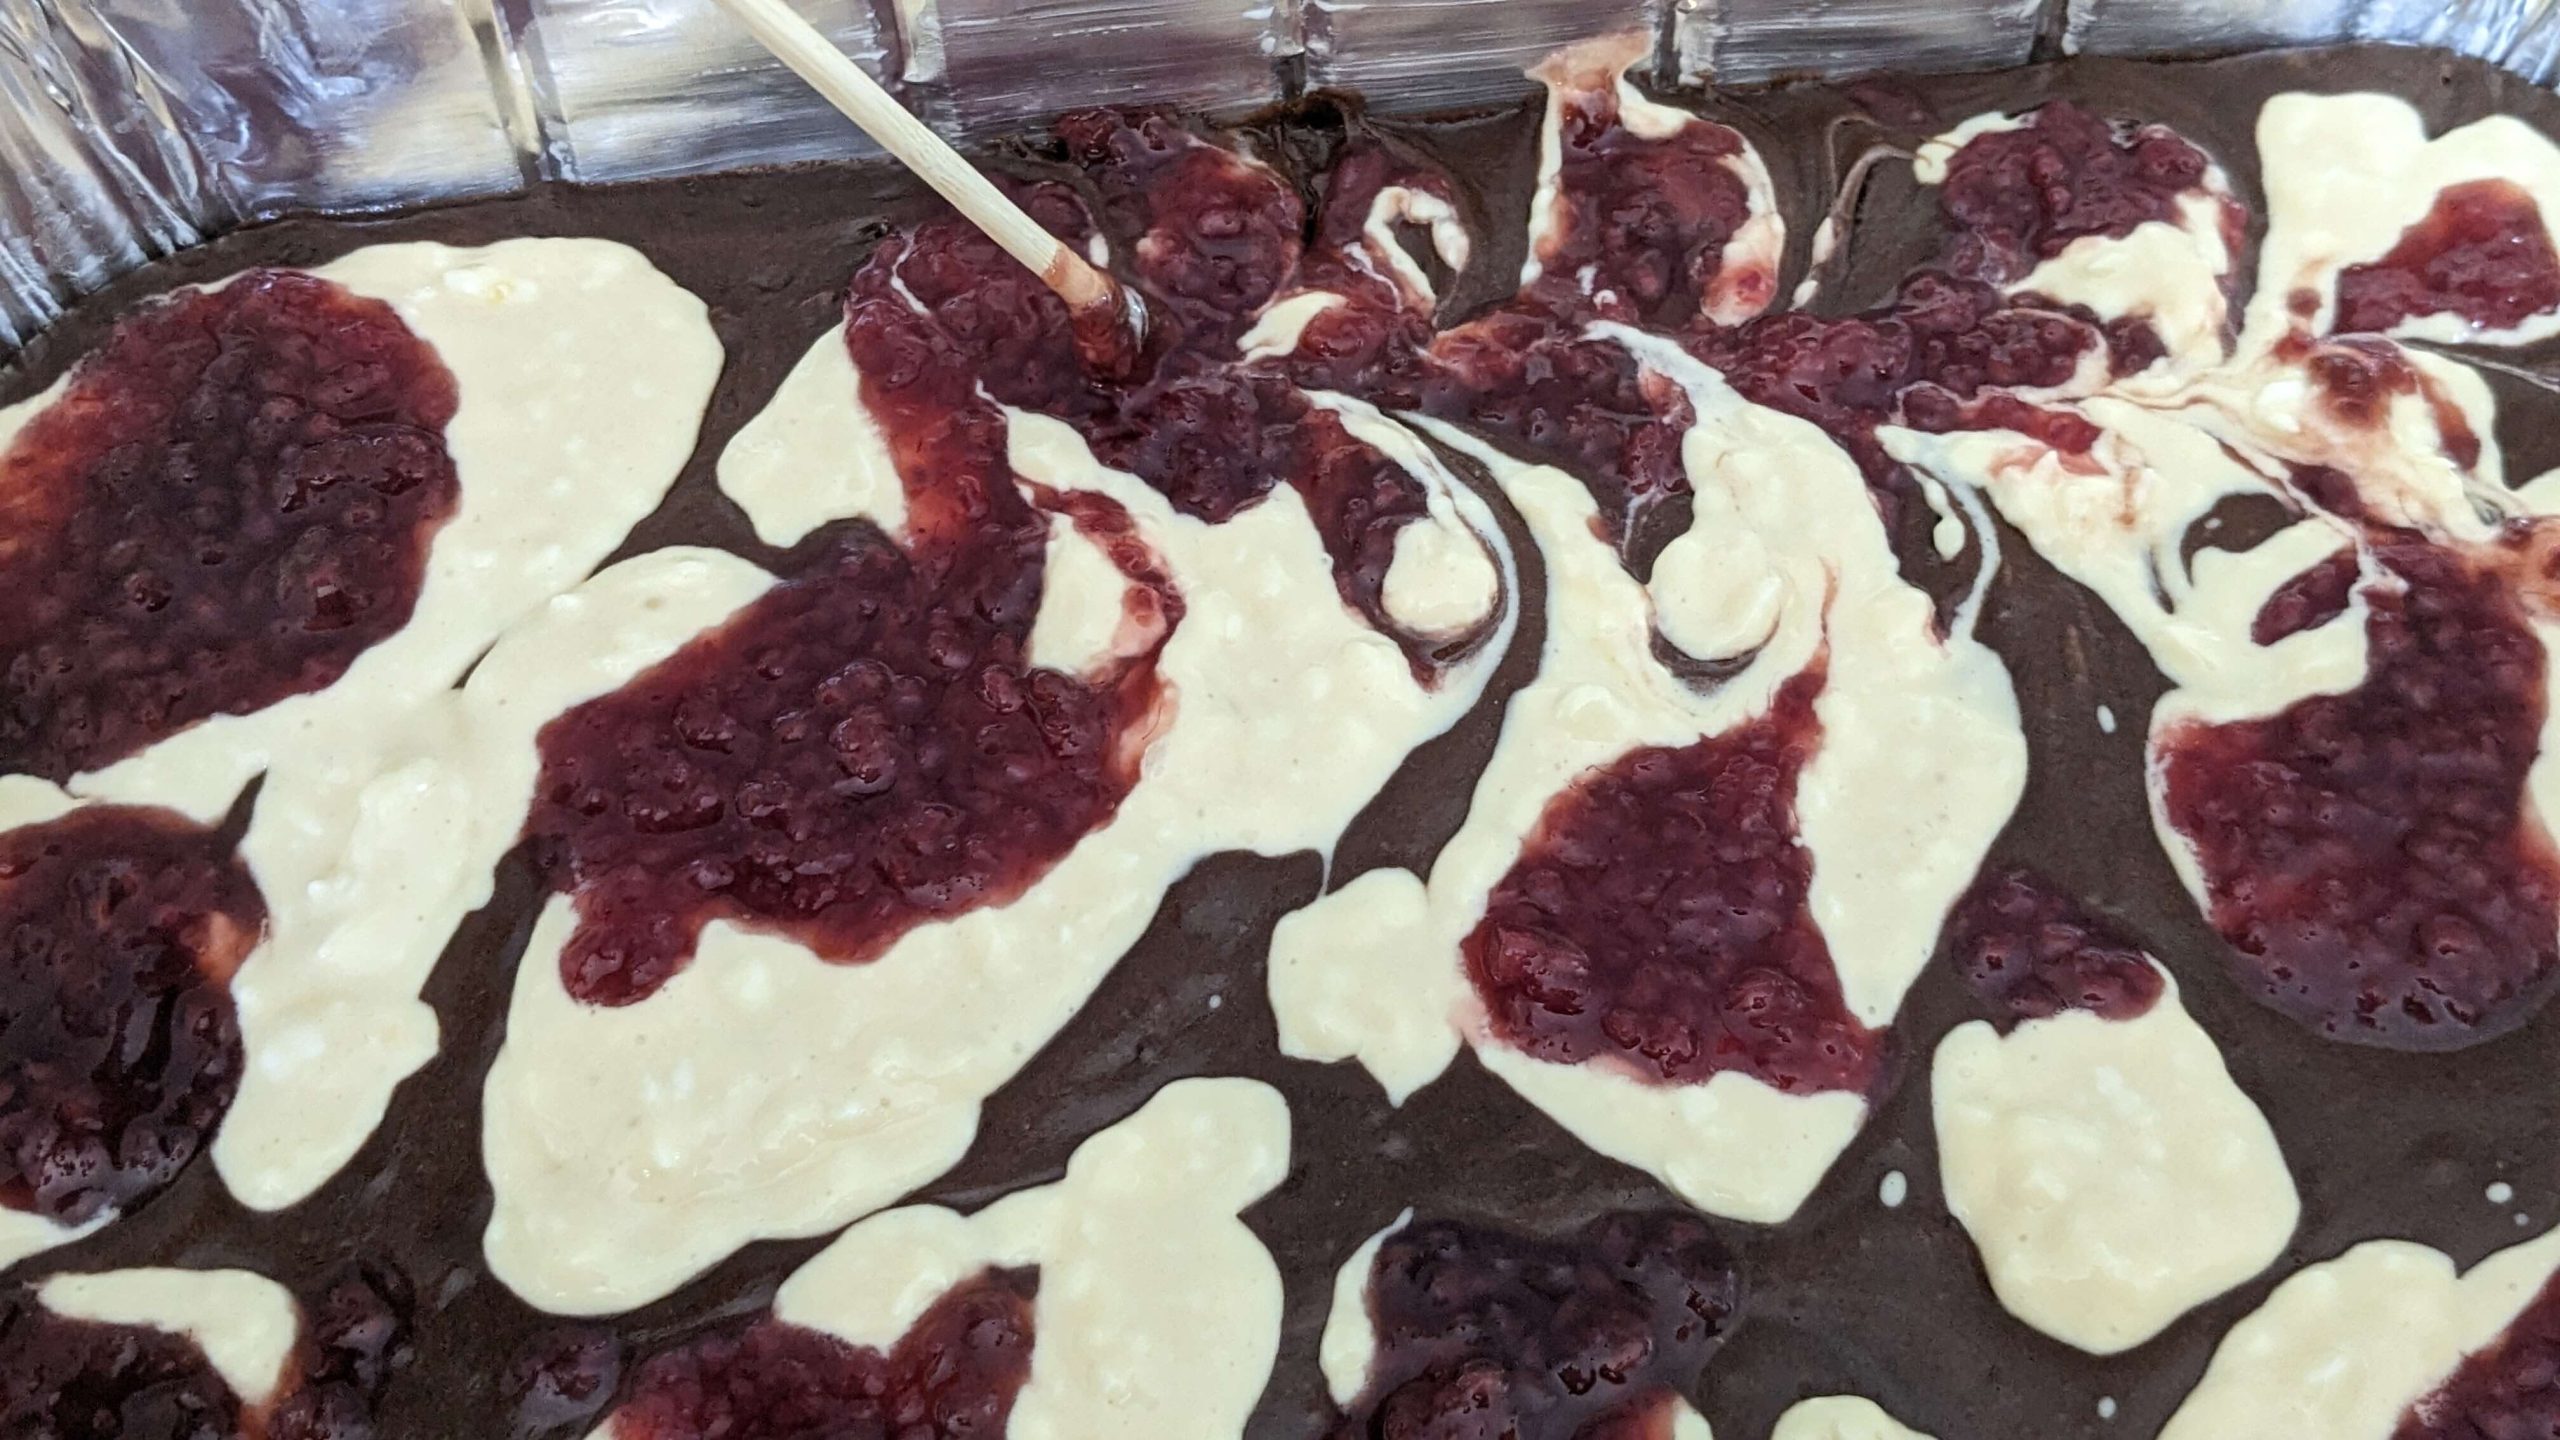 raspberry jelly and cream cheese mixture being swirled into brownie batter in an aluminum pan